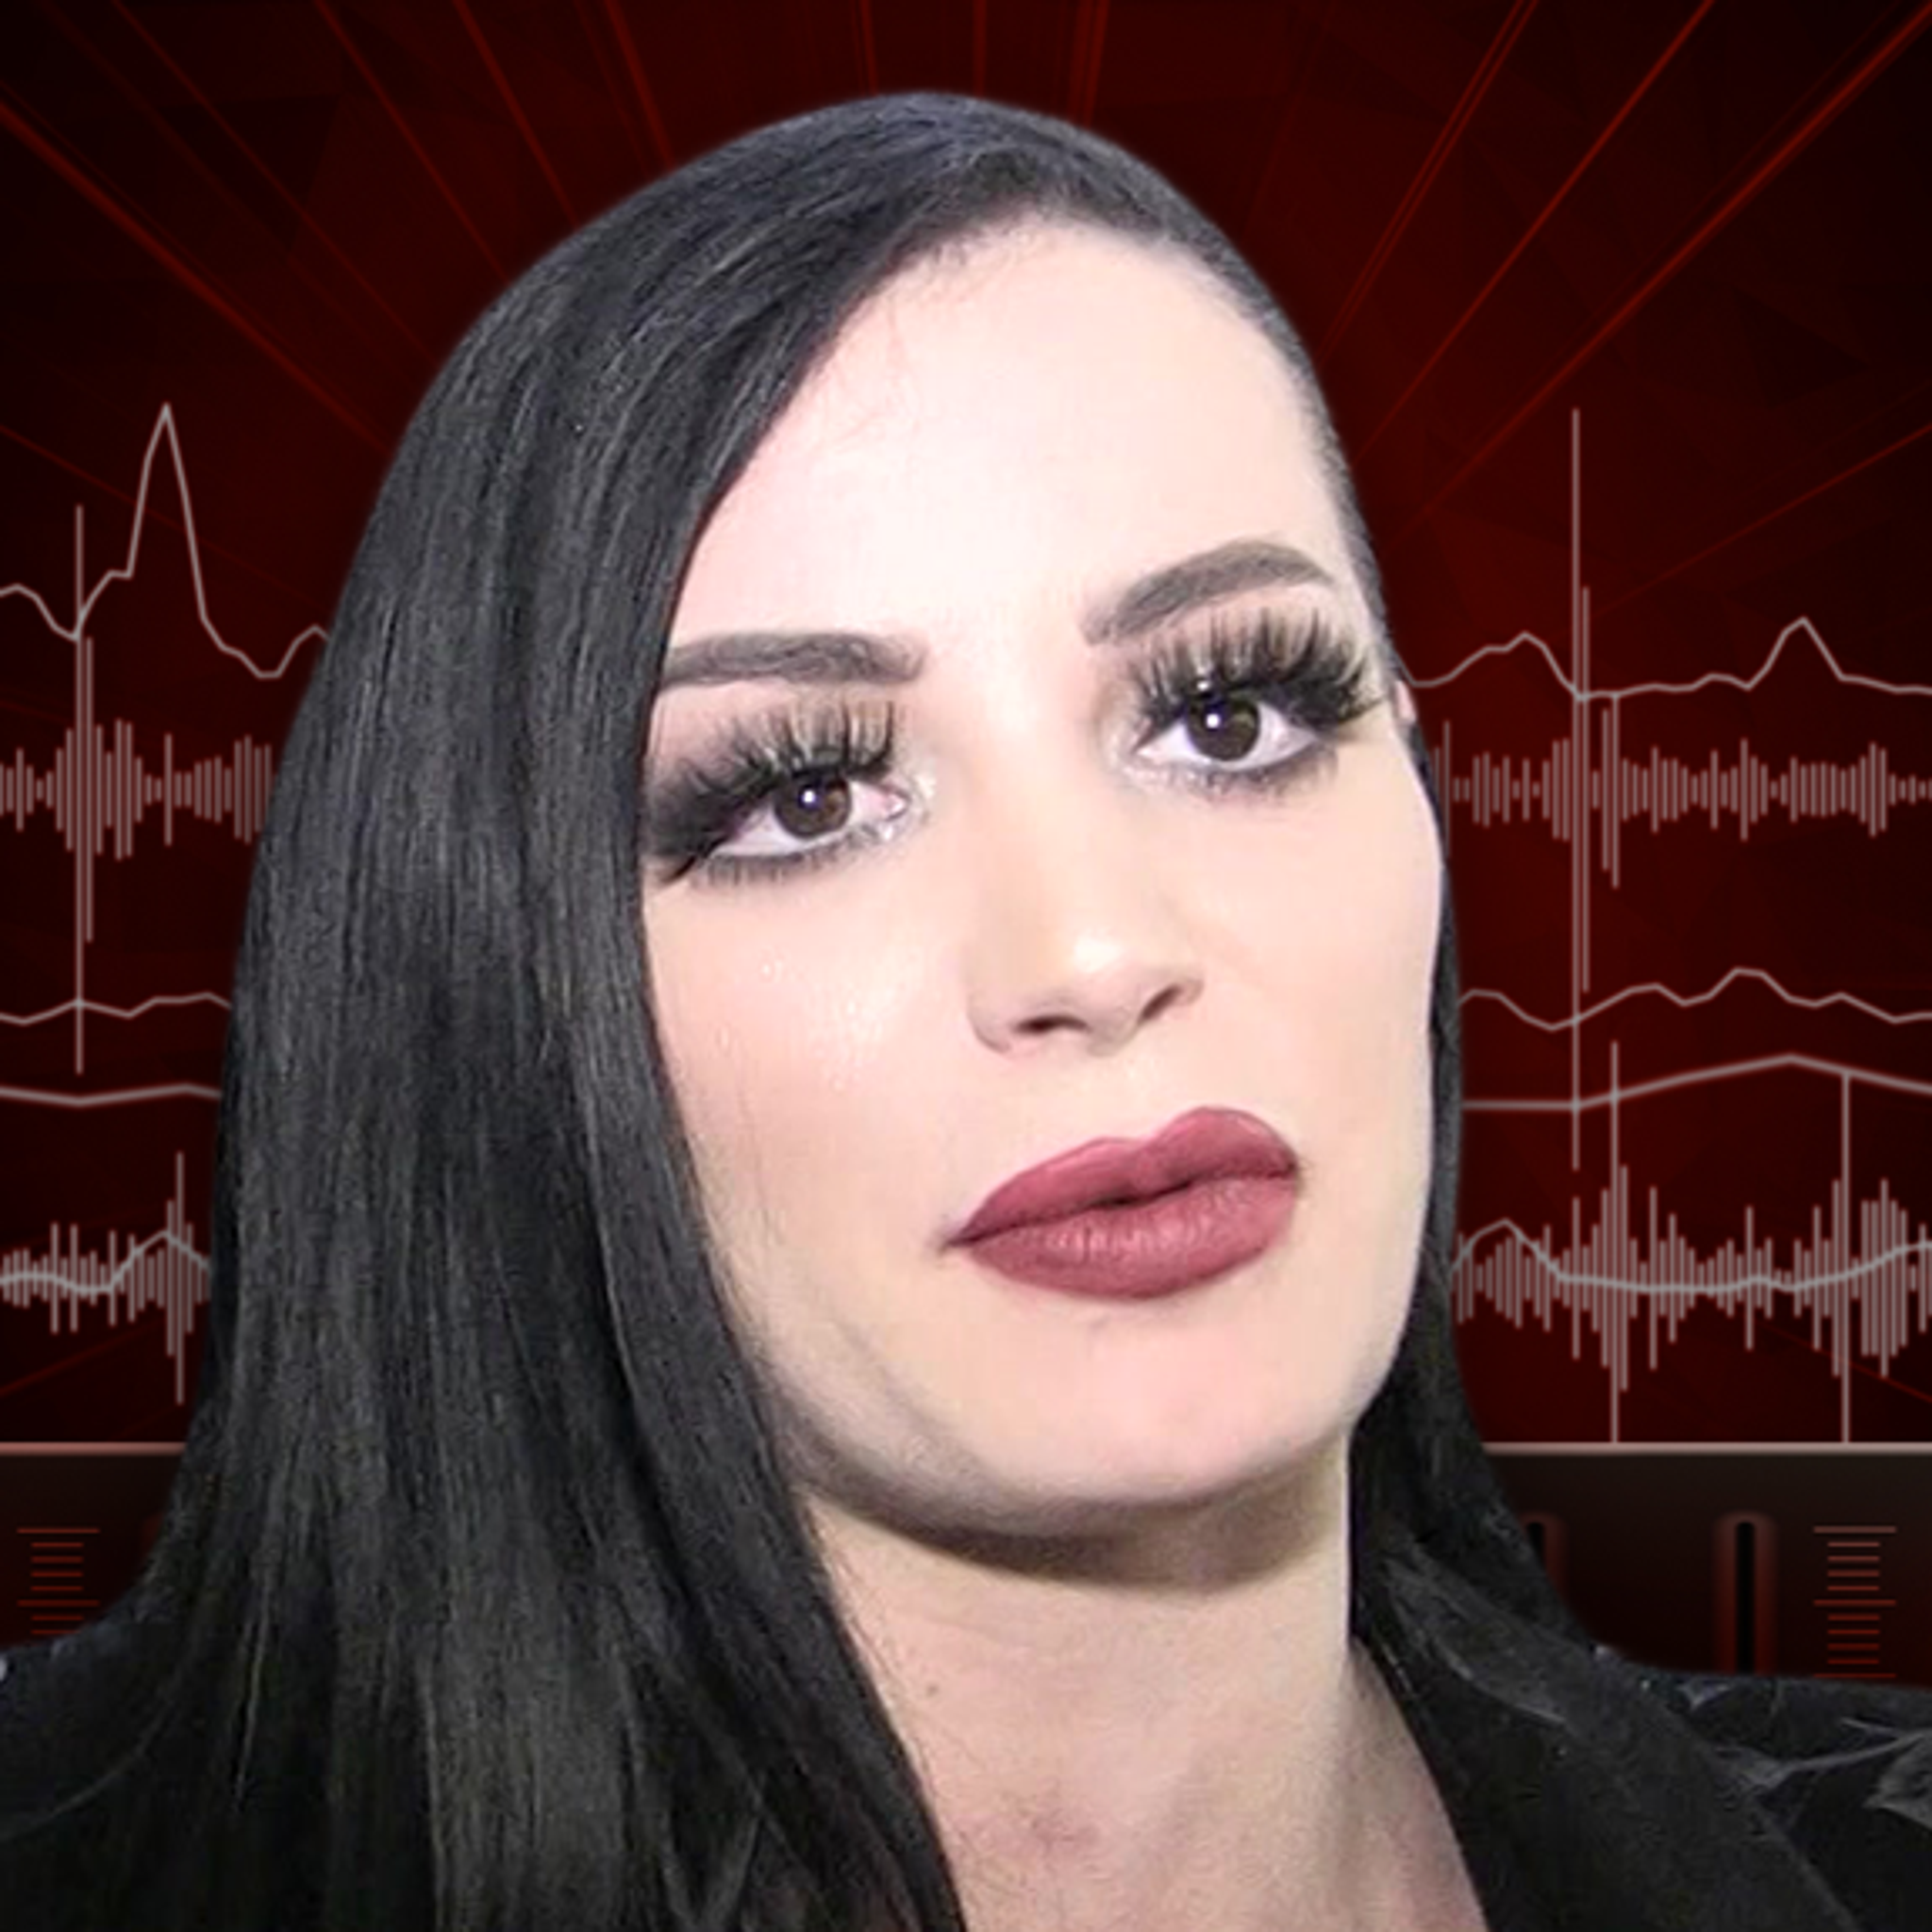 demetria kelly recommends Diva Paige Leaked Video